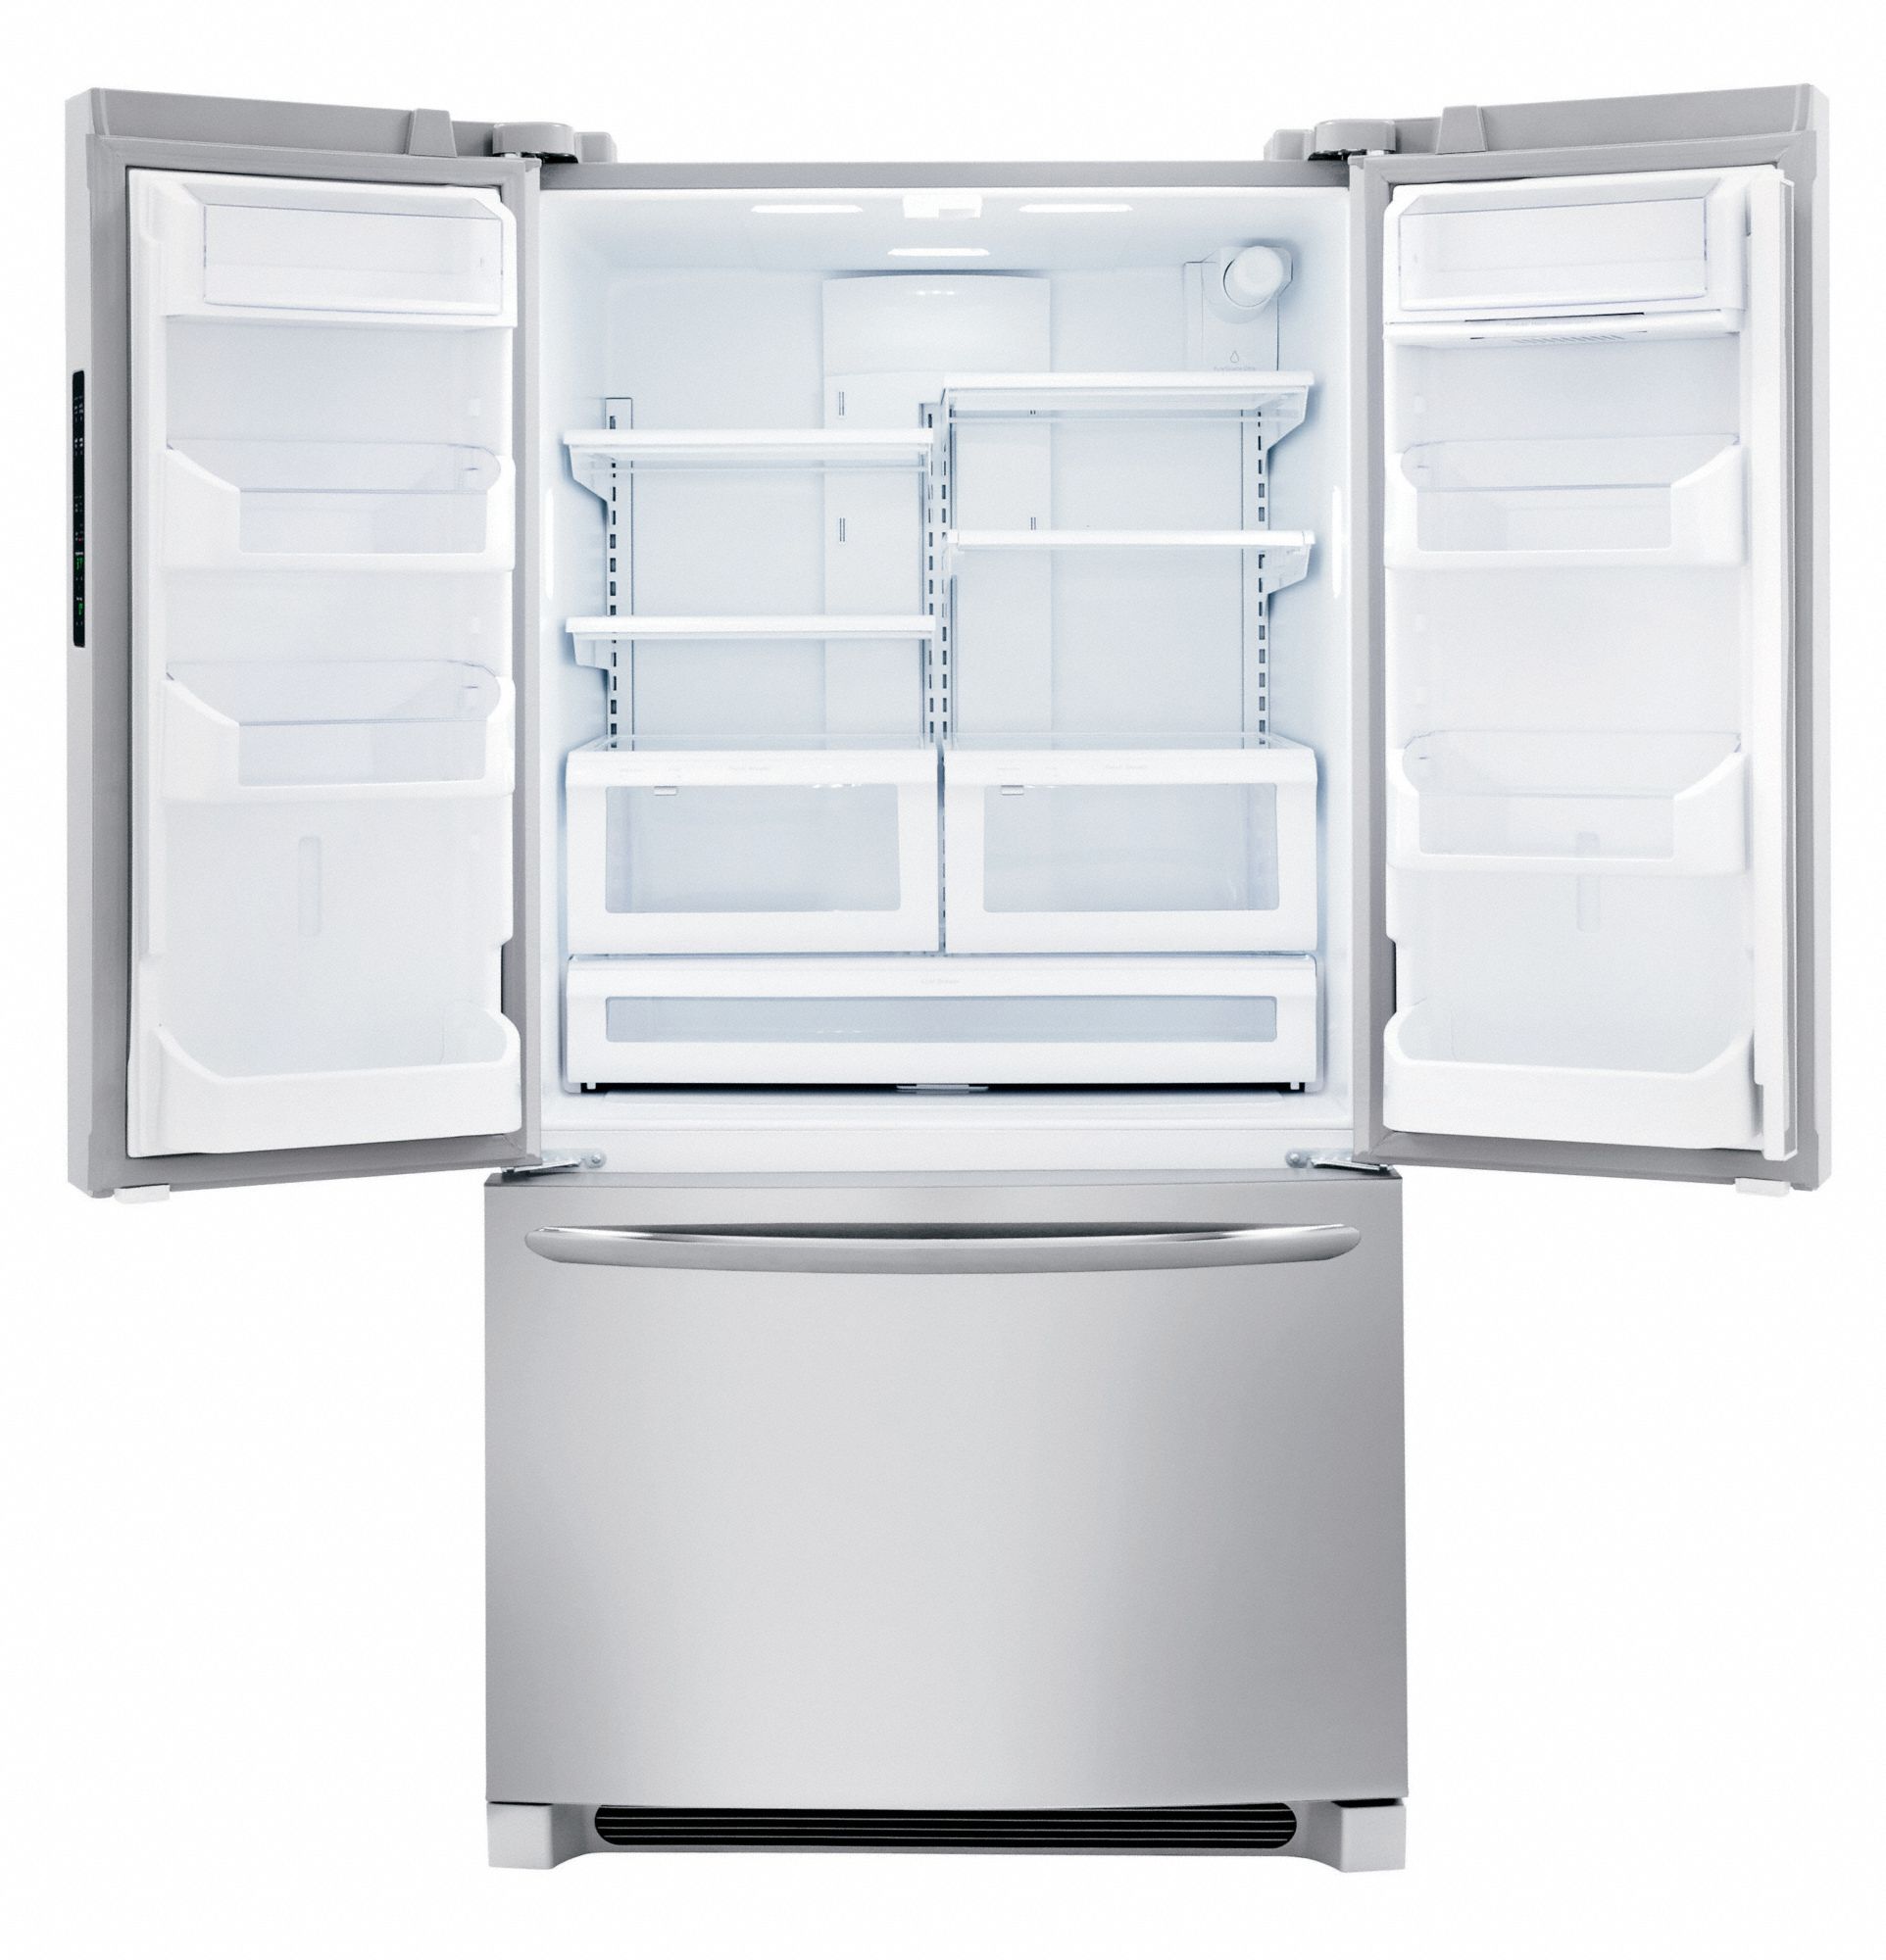 frigidaire-refrigerator-residential-stainless-steel-36-in-overall